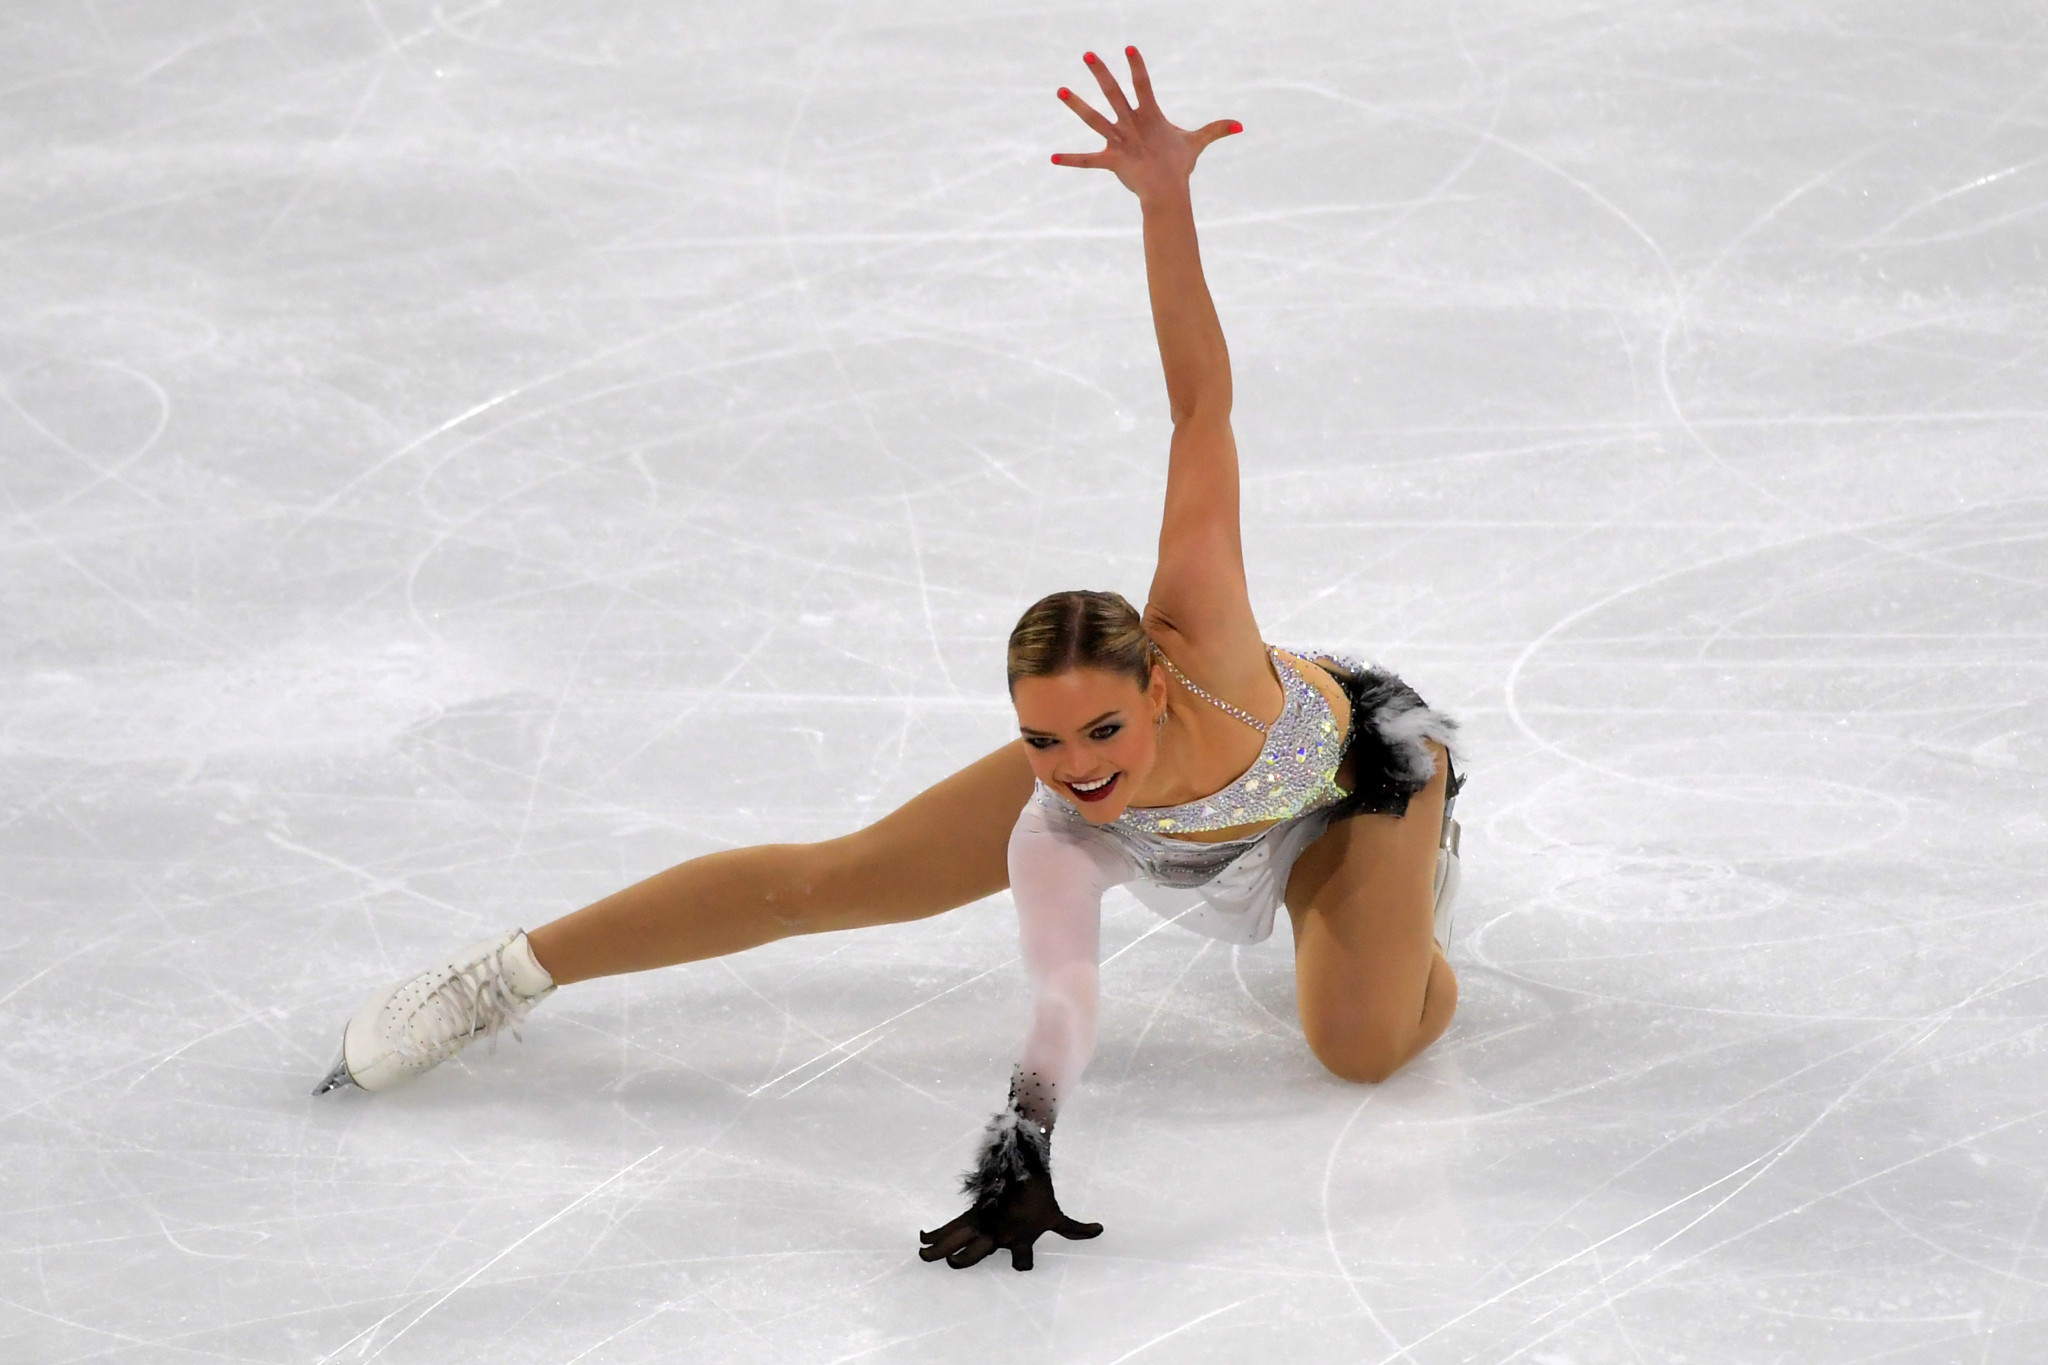 Russia absent for European Figure Skating Championships in Espoo